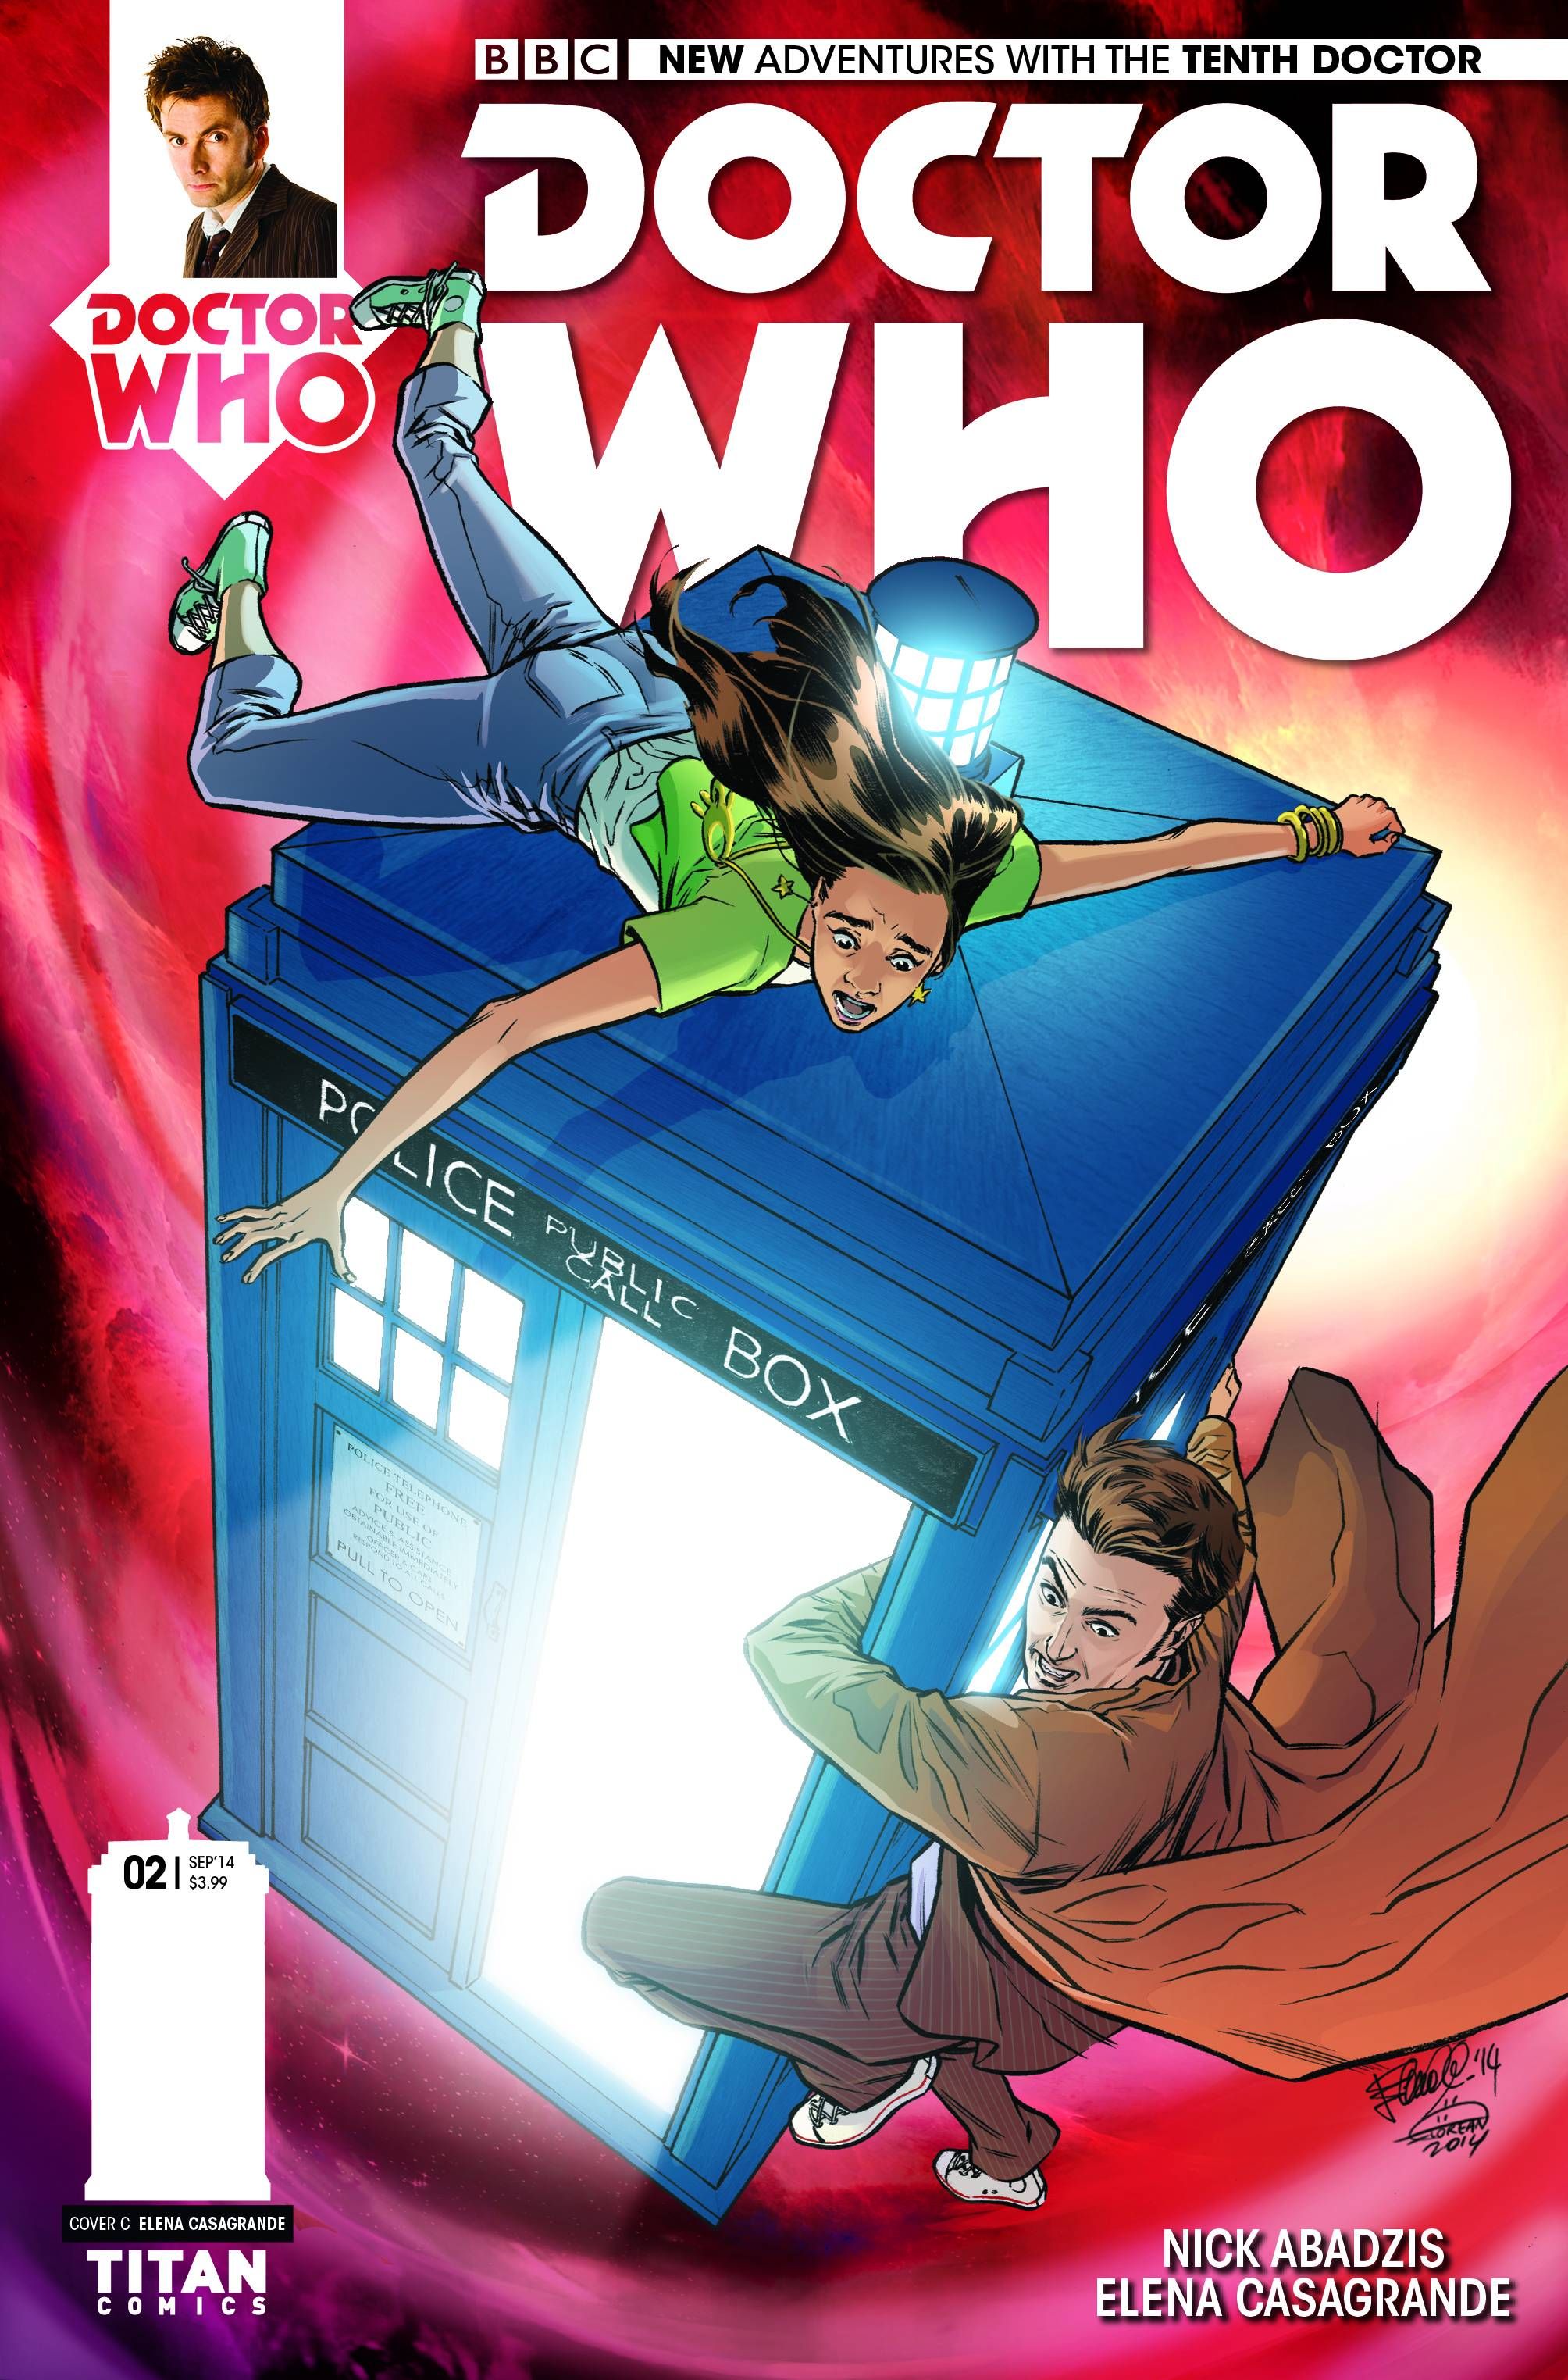 Doctor Who: The Tenth Doctor Comic